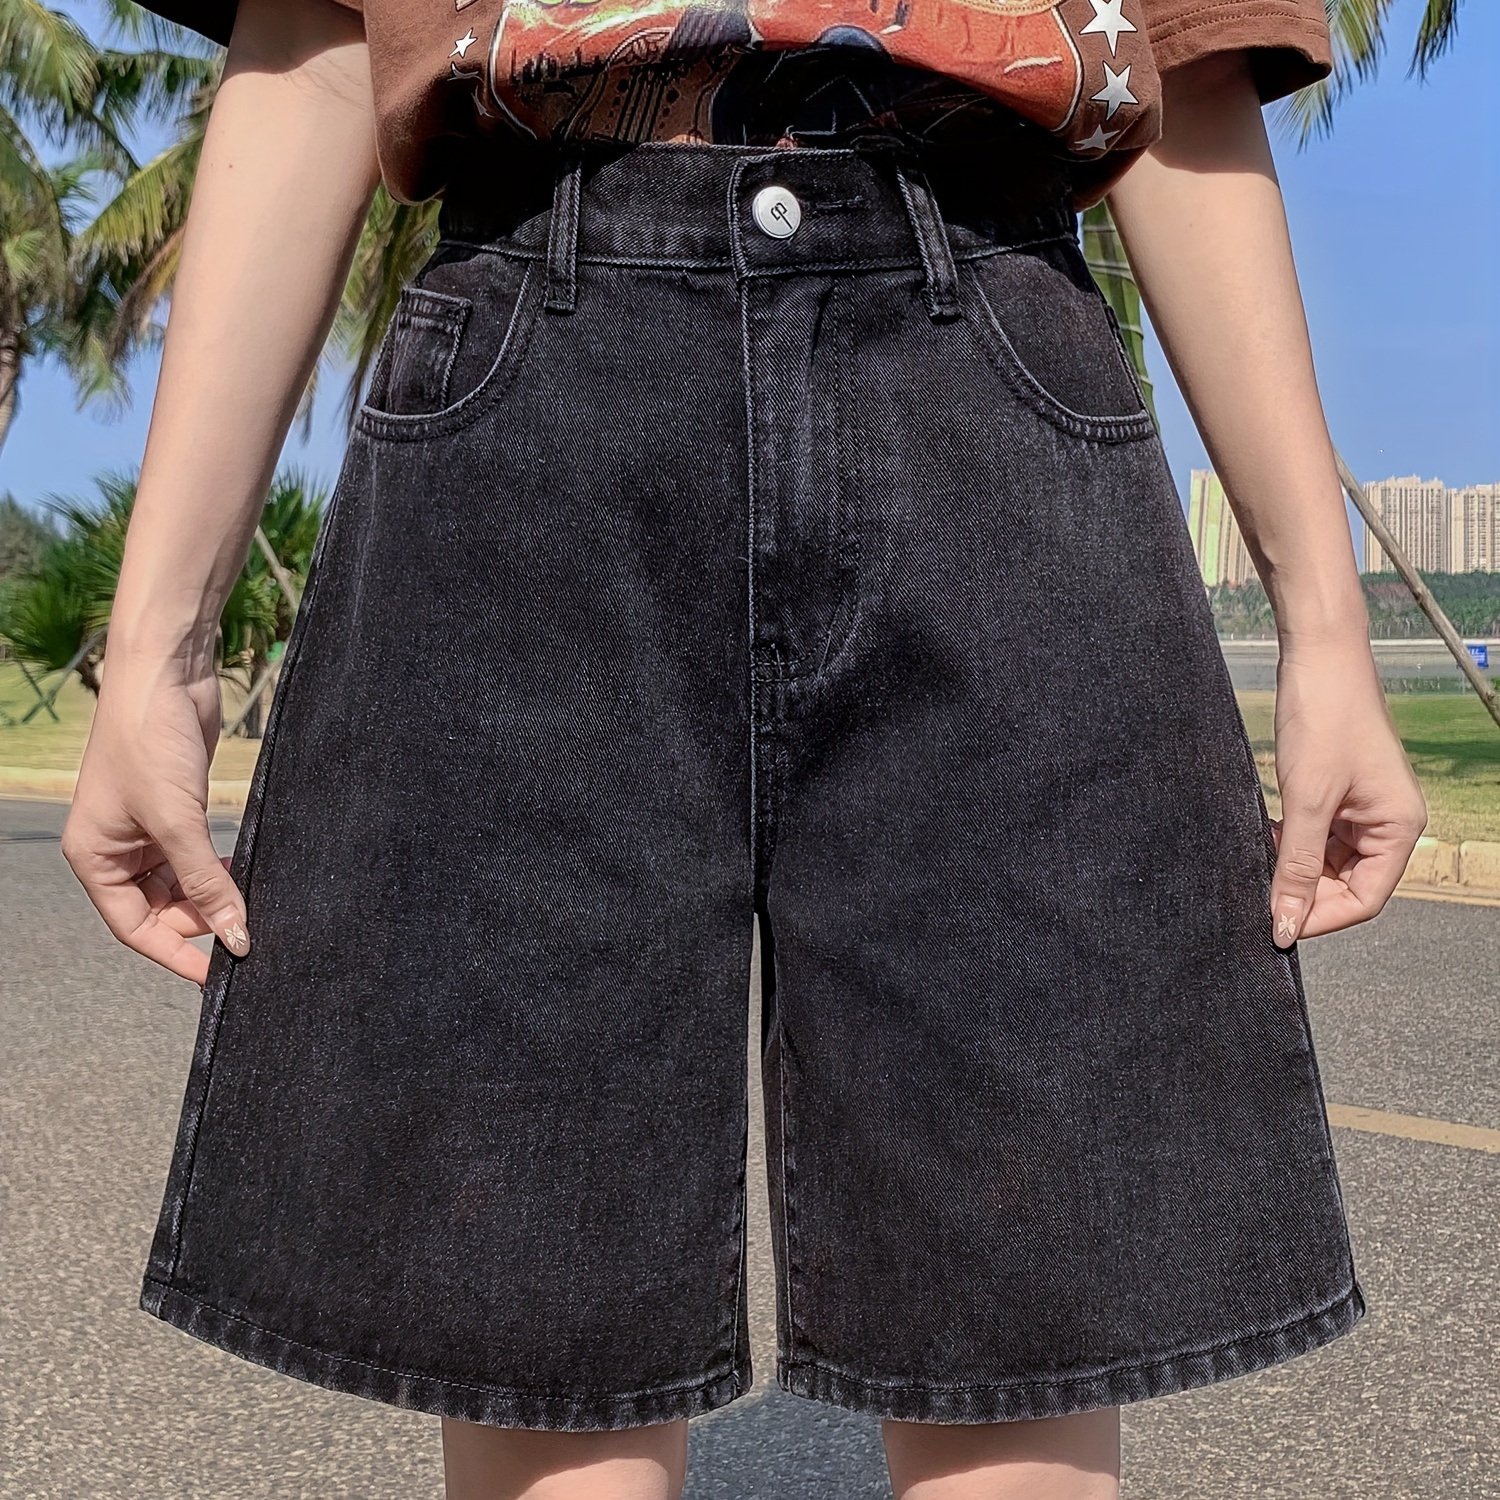 

Women's Plus Size Bermuda High Waisted Denim Shorts For Summer With Pockets, Elastic Waist Loose Straight Jean Shorts For Women, Casual Black Color Comfy Denim Bottoms, Women's Clothing